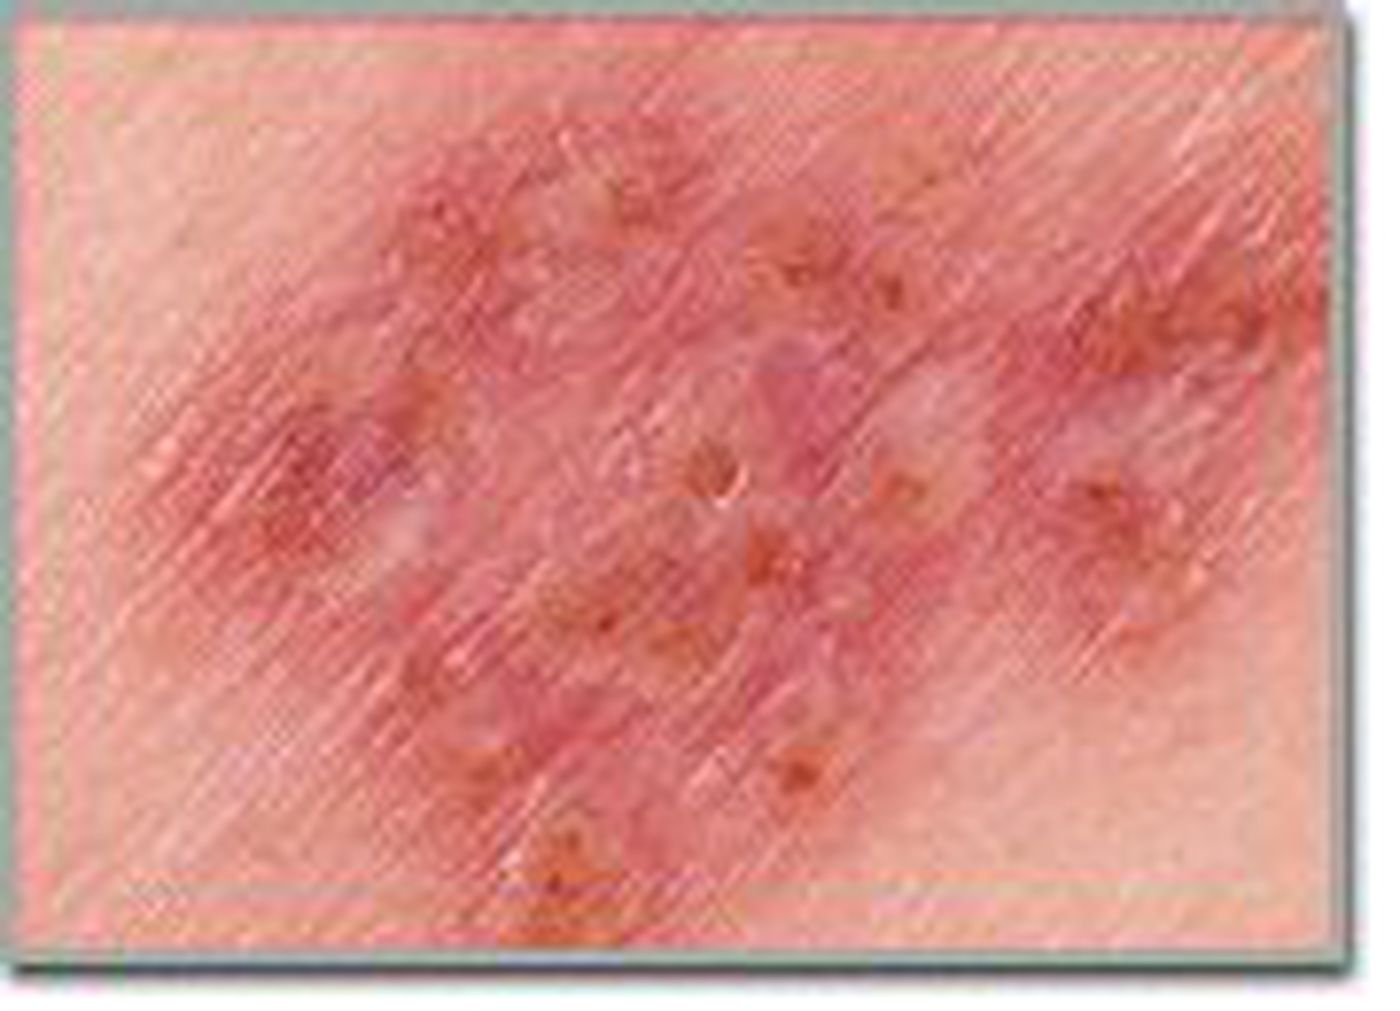 Herpes one of the most common STD